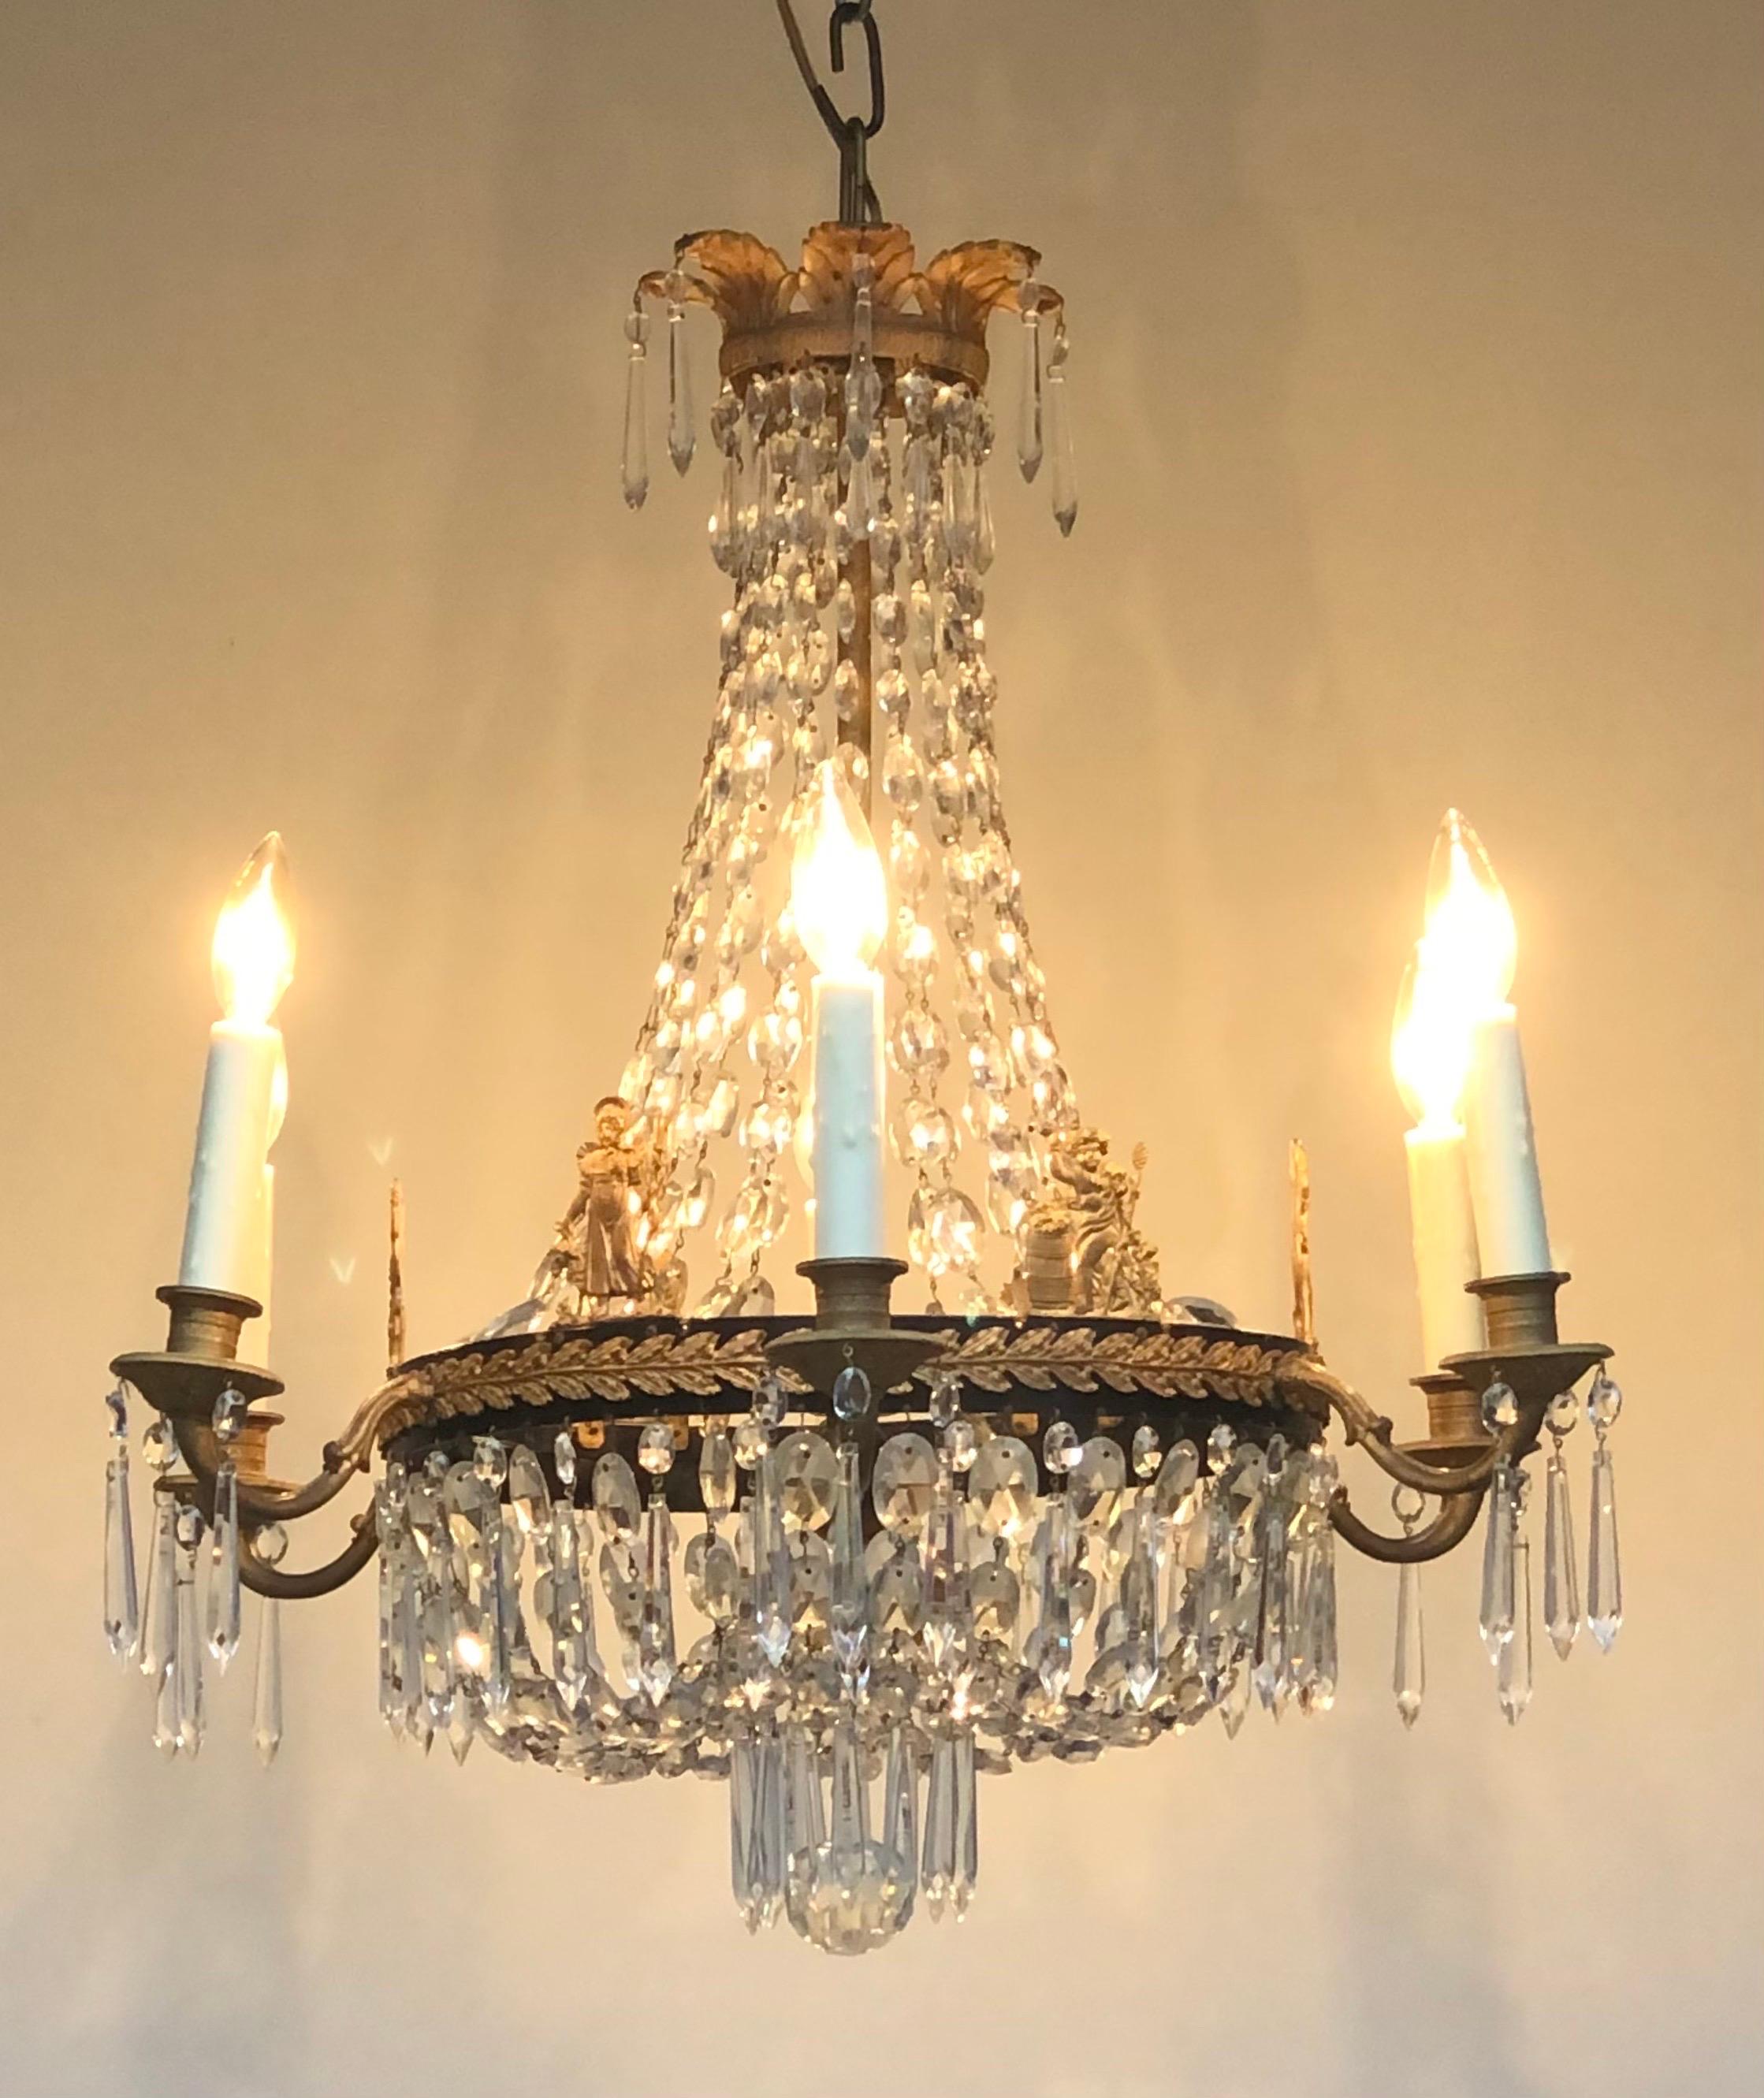  This Regal First Period French Empire Ormolu and Crystal Six-Arm Chandelier was made in France in the Early Nineteenth Century.  The Bronze Doré Castings are of the highest refined quality.  The Doré Corona is surmounted with seven Acanthus Leaves,